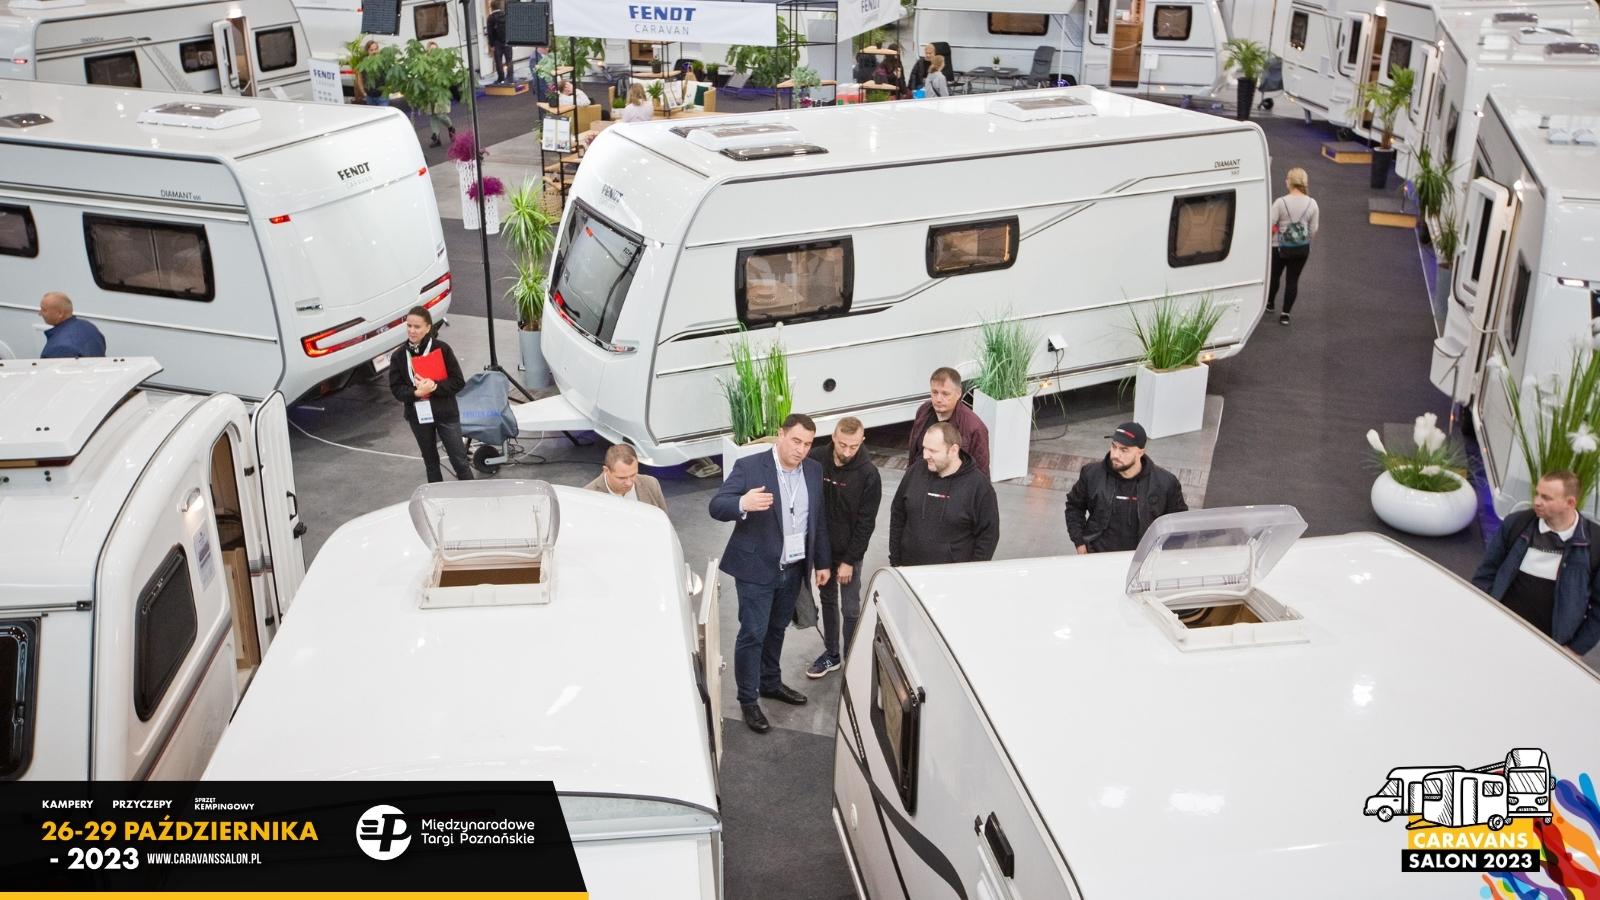 Is caravanning for you? Check it out at Caravans Salon Poland! – main image